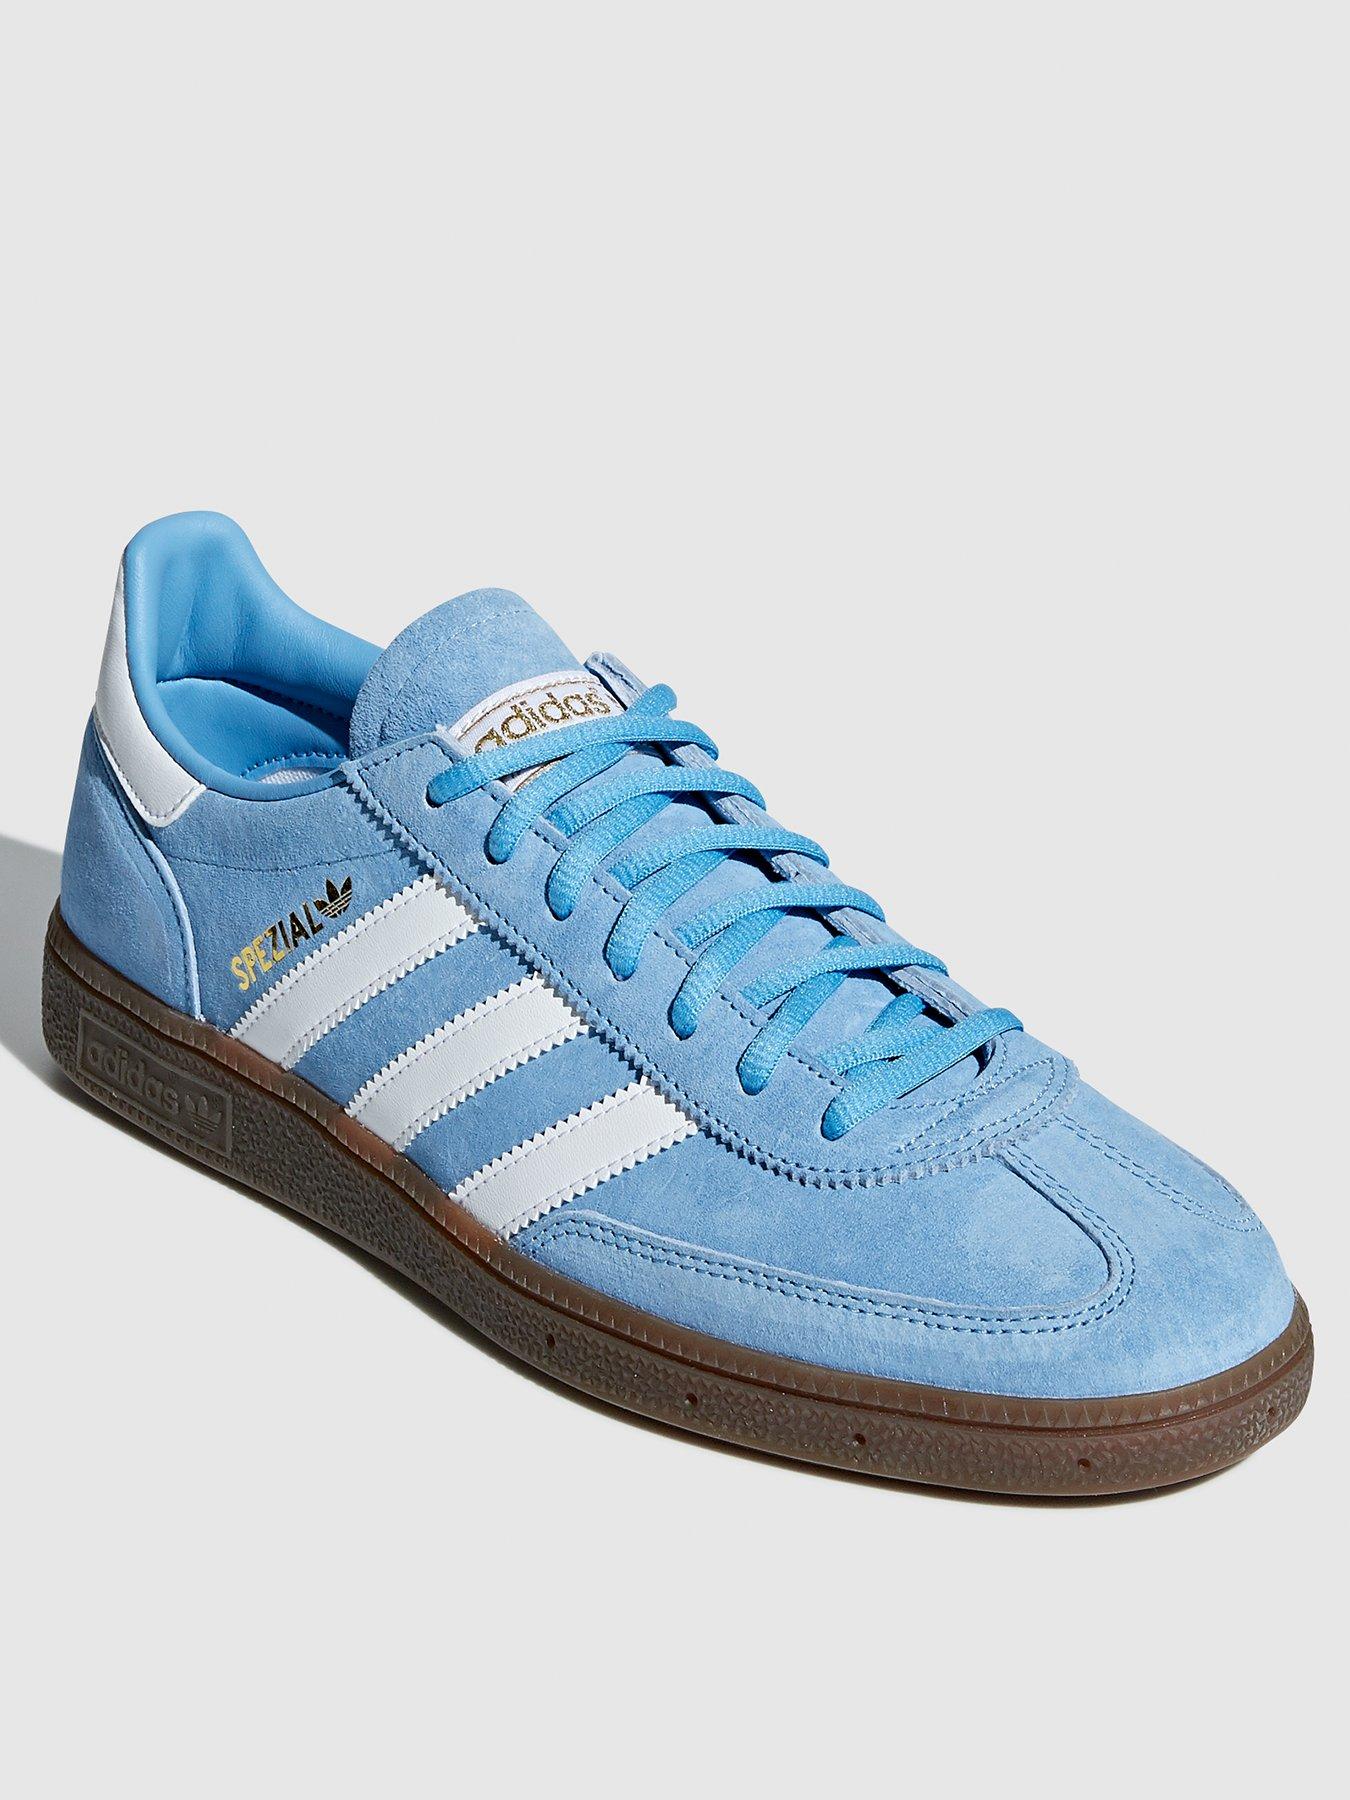 littlewoods mens trainers adidas